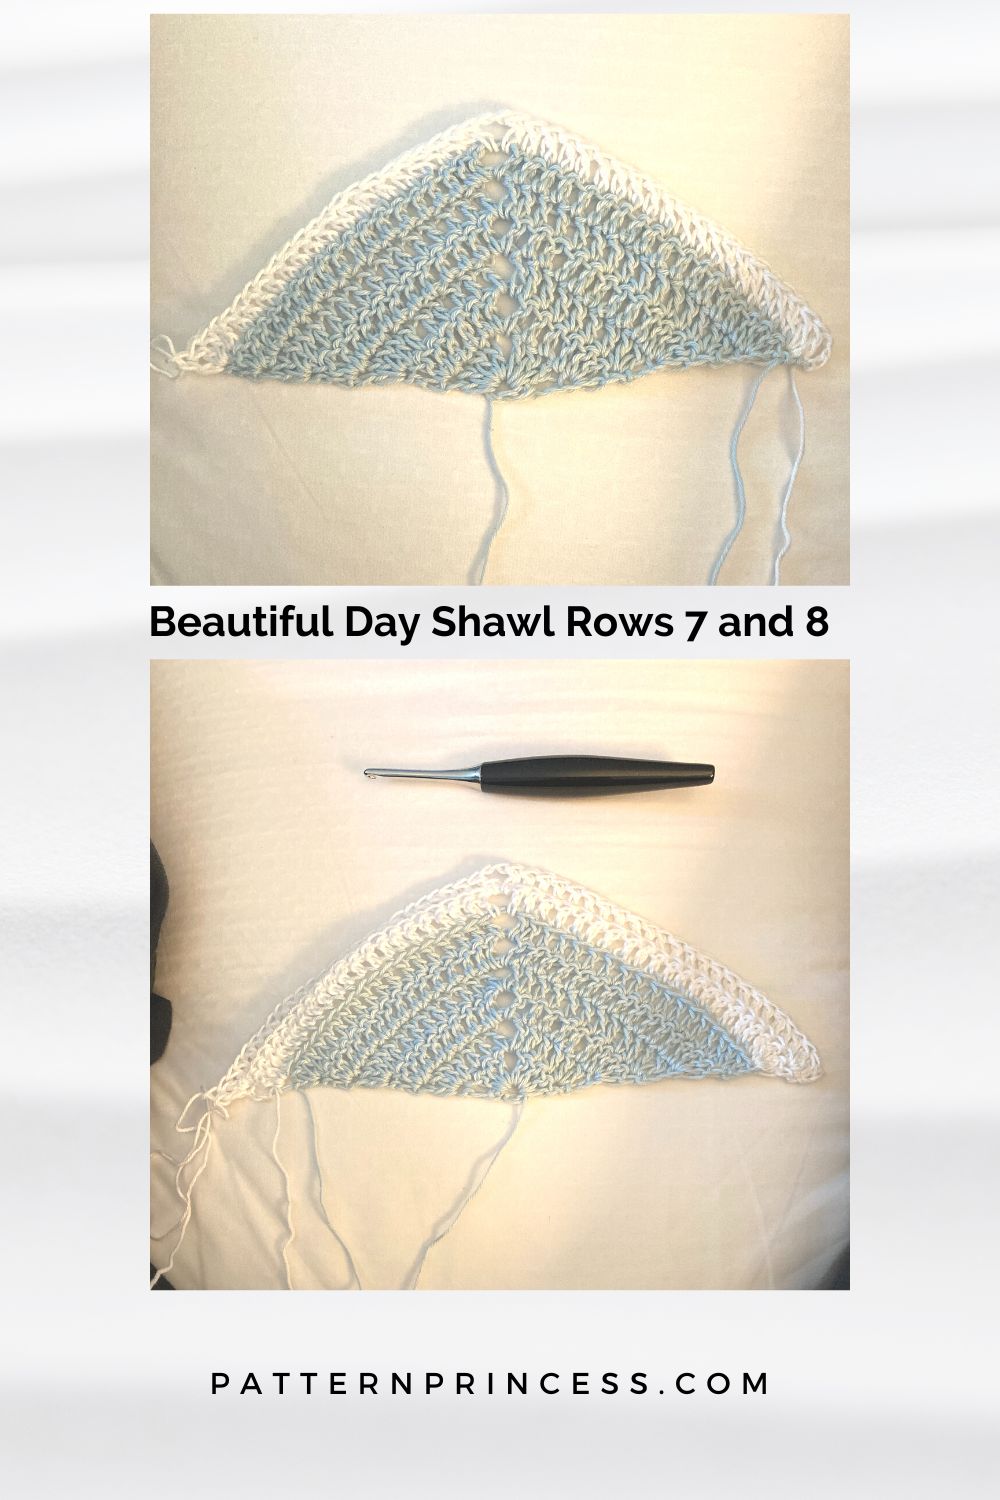 Beautiful Day Shawl Rows 7 and 8